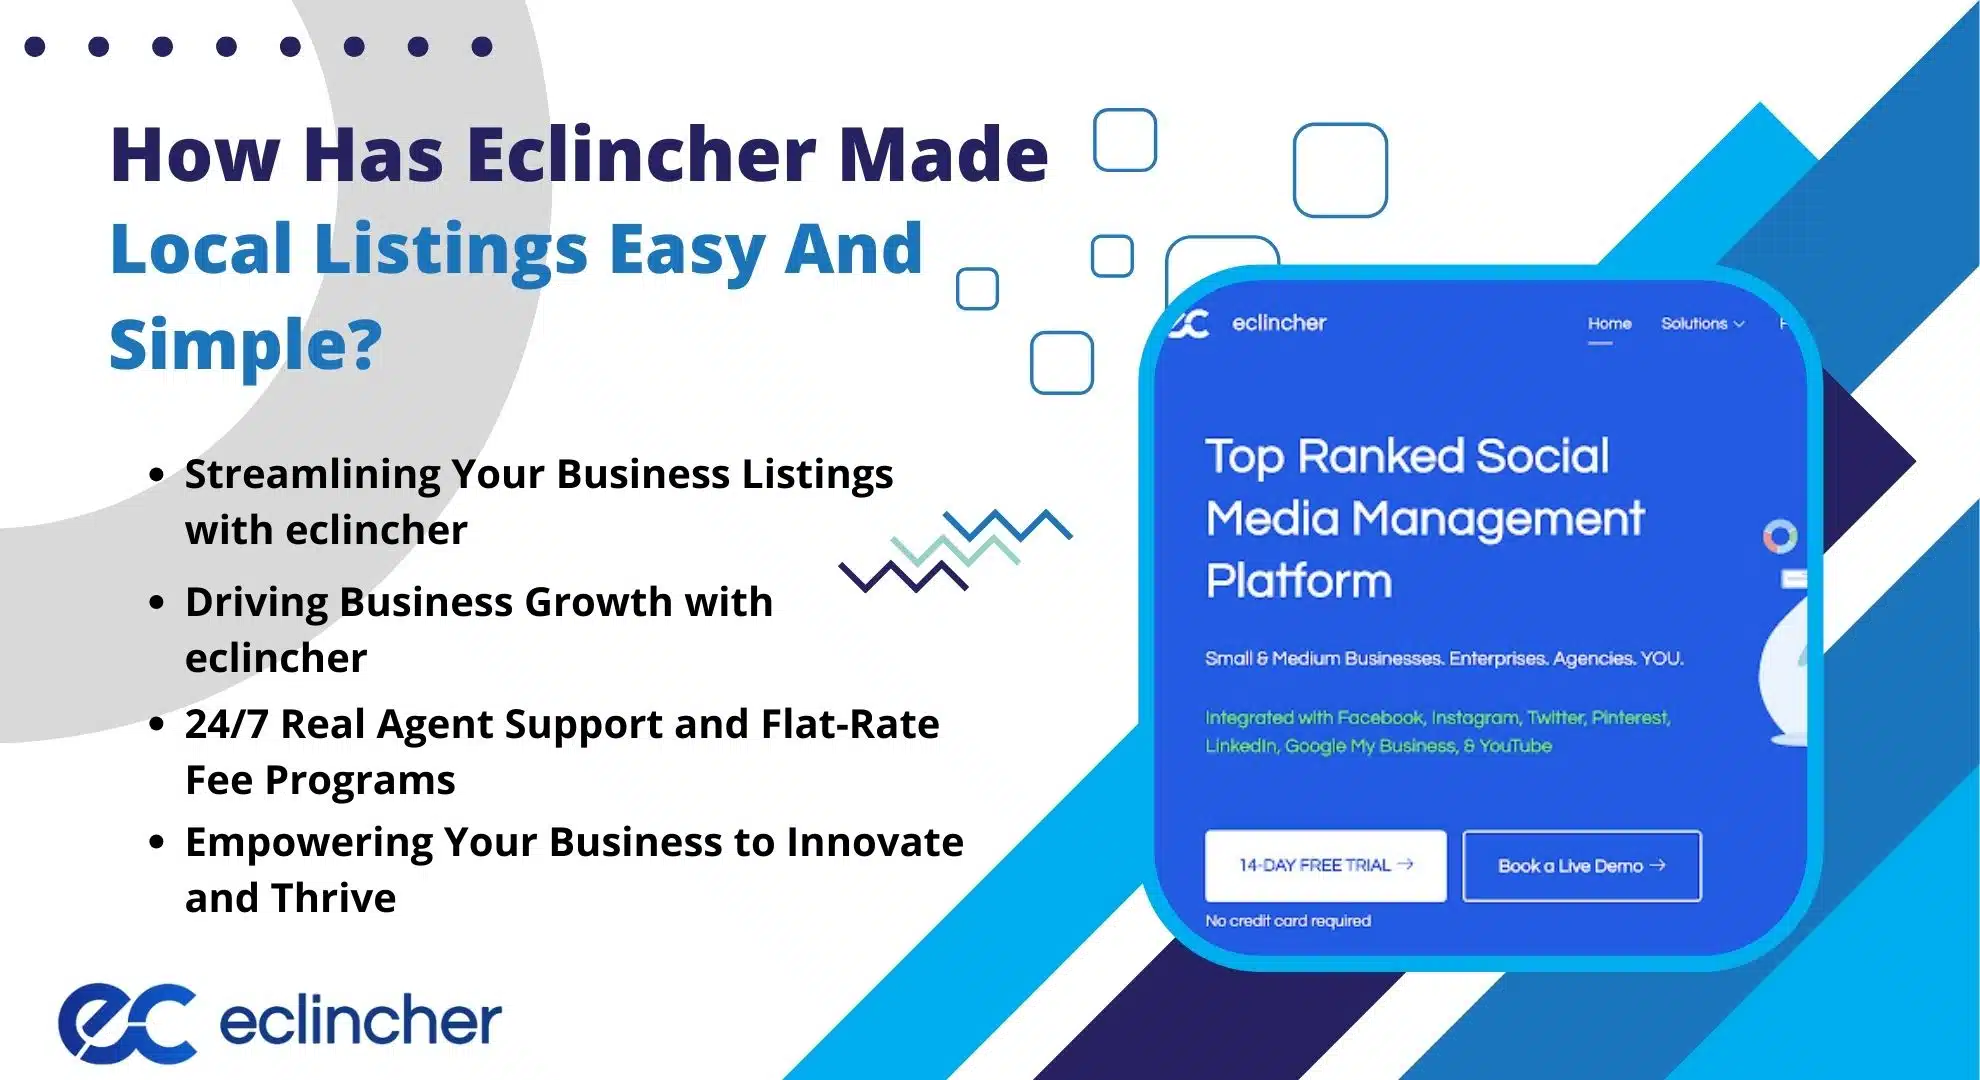 How Has Eclincher Made Local Listings Easy And Simple